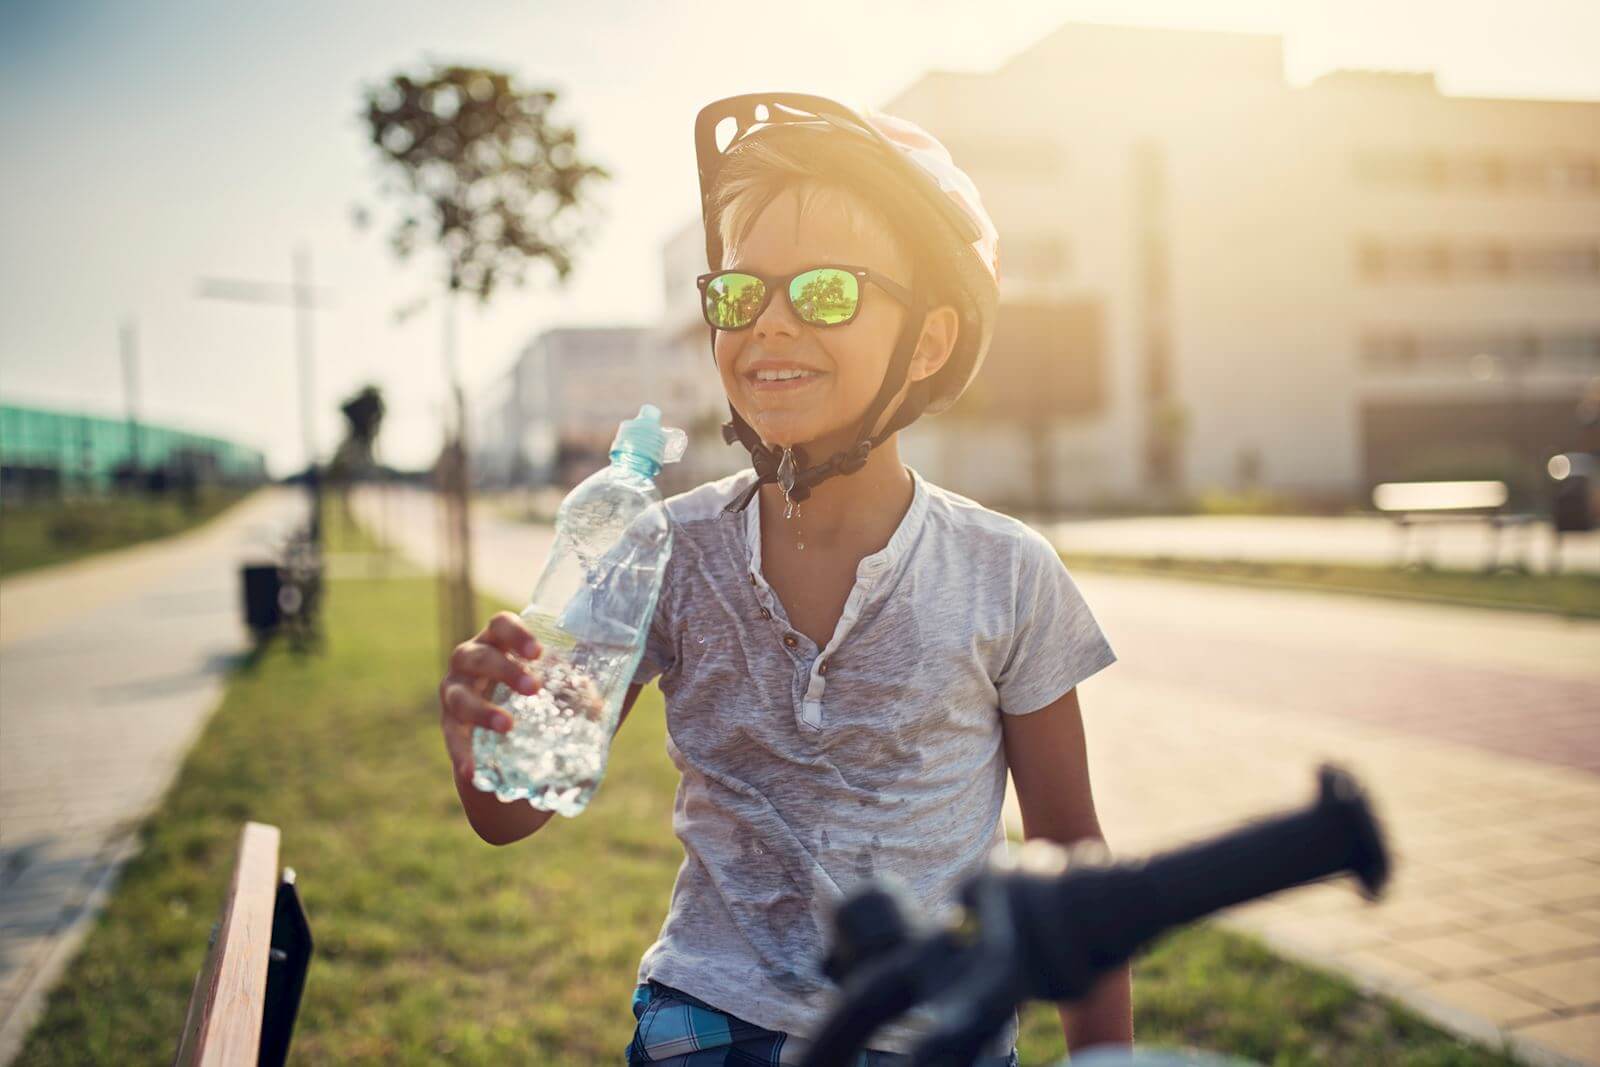 Young boy on a bike drinks water in the sunshine